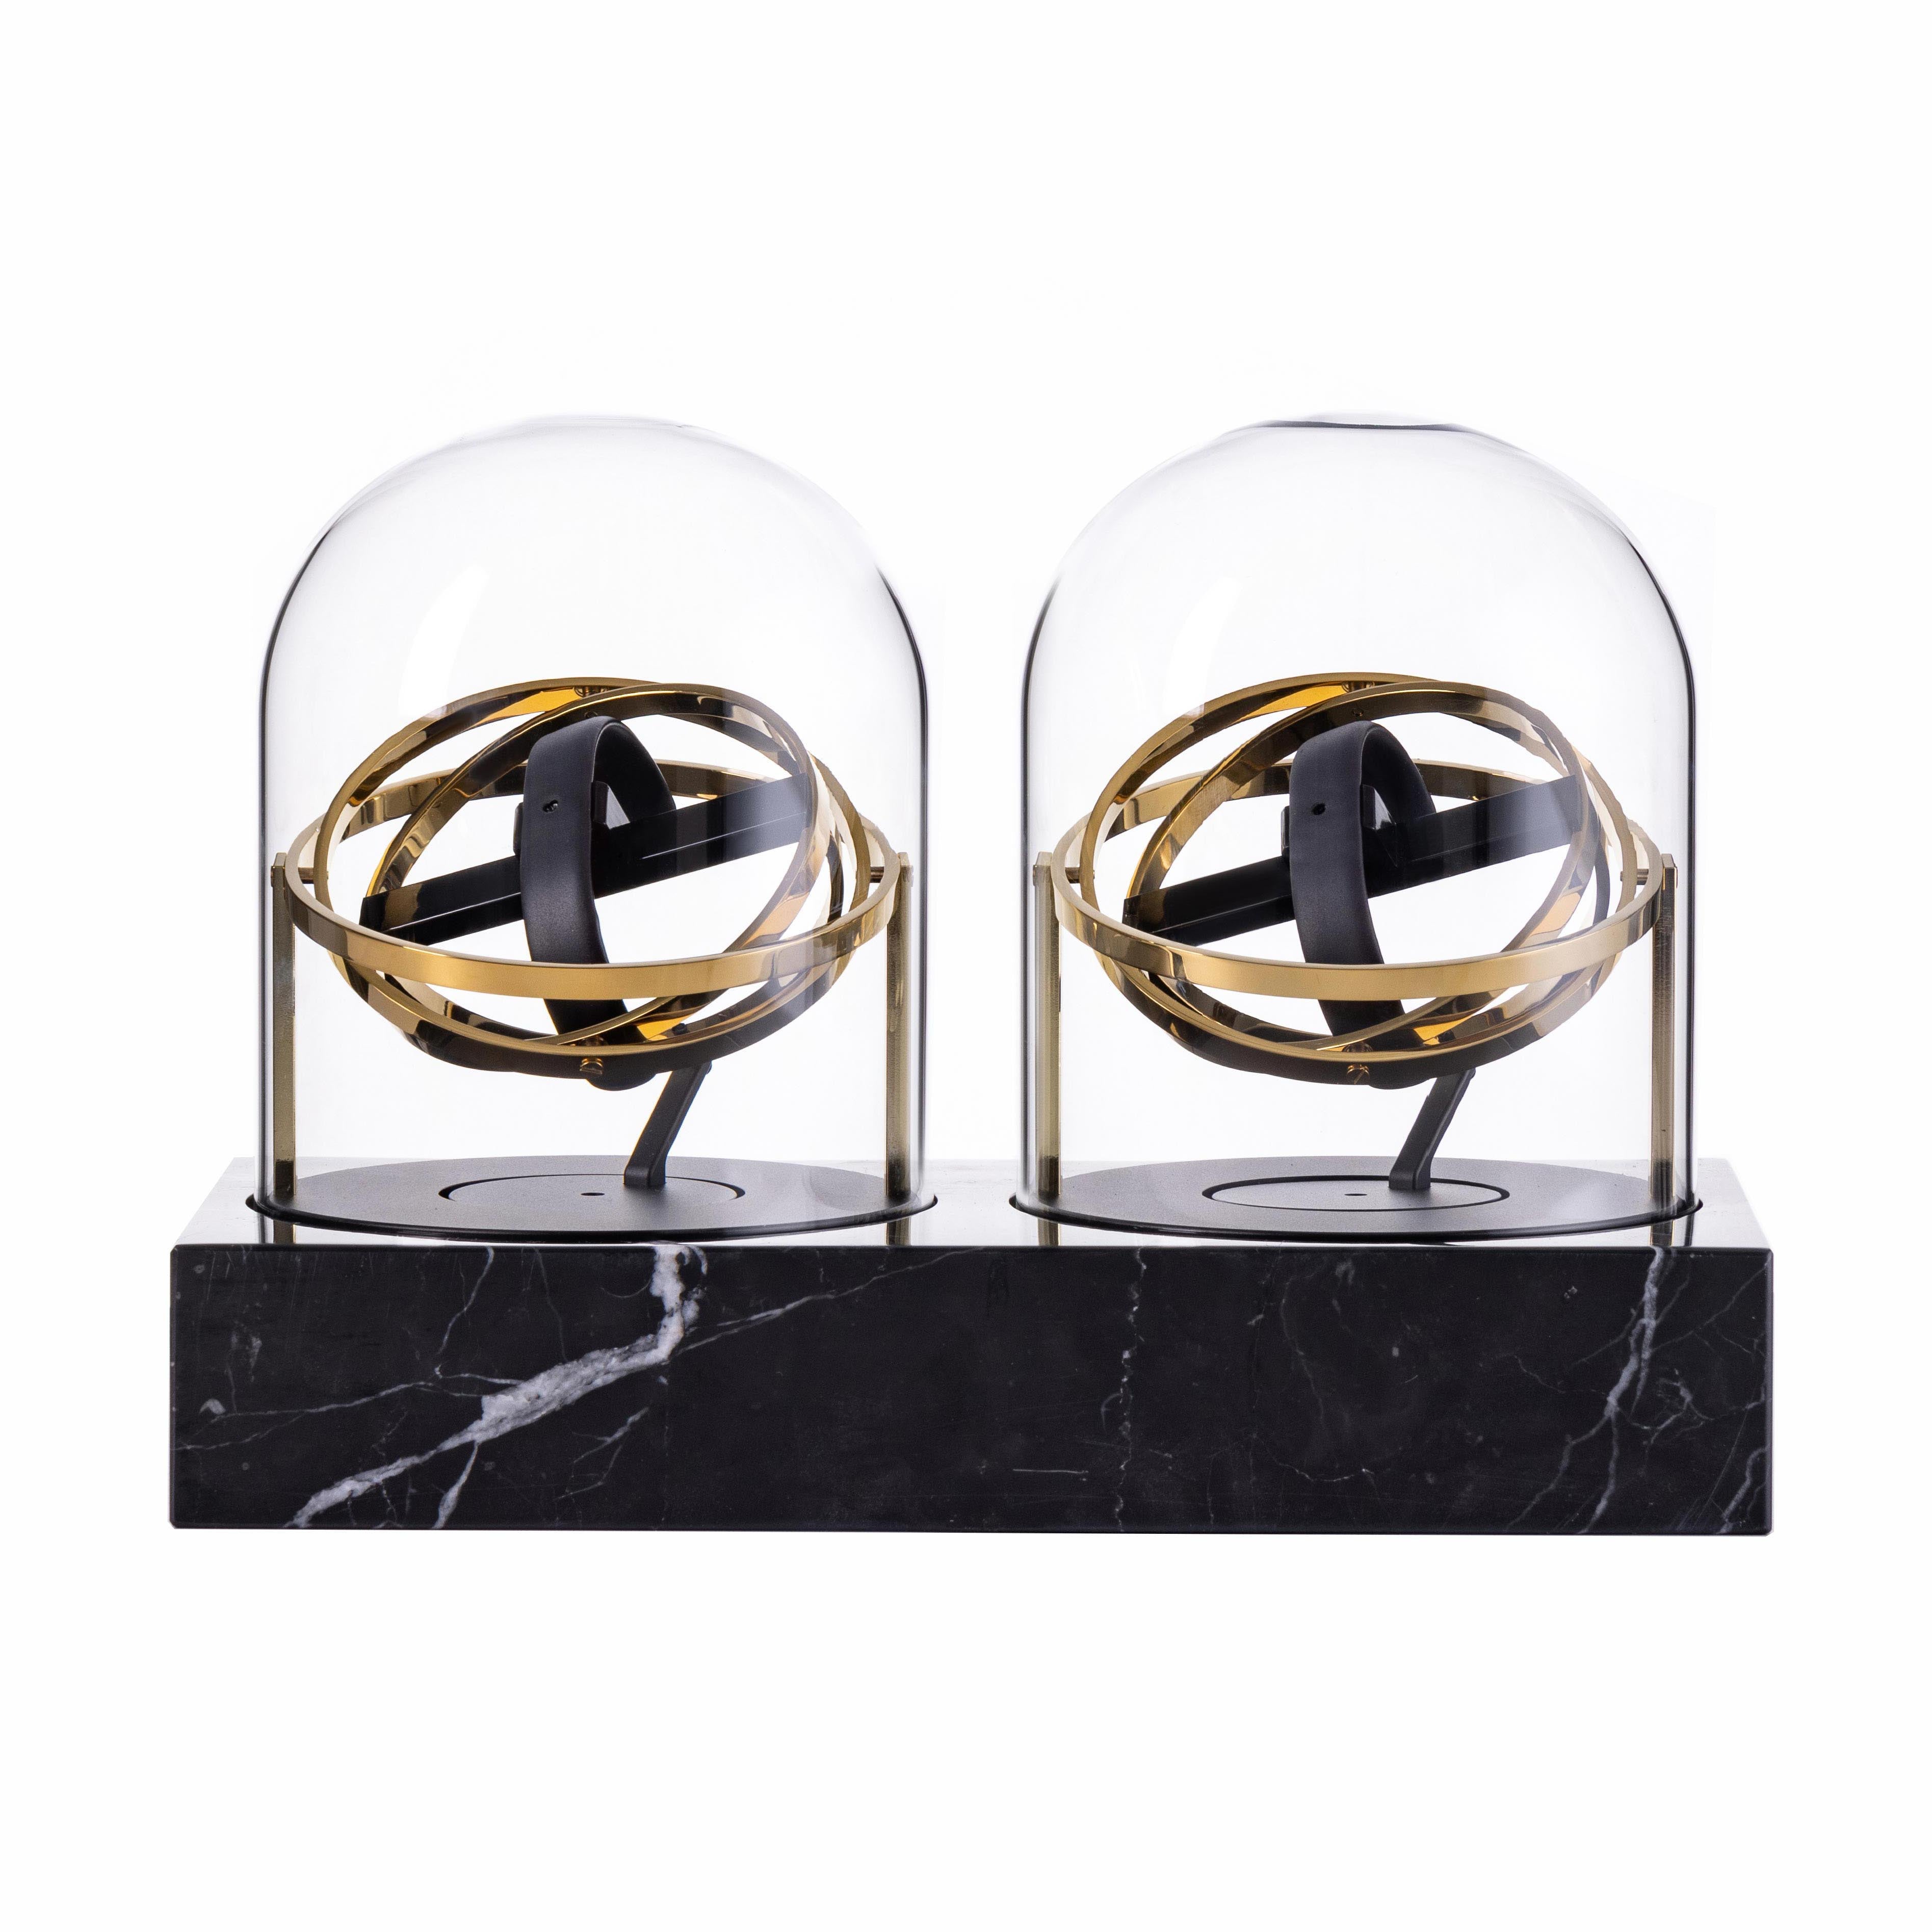 Double Watch Winder - Astronomia X1 Silver - Black Marble Edition